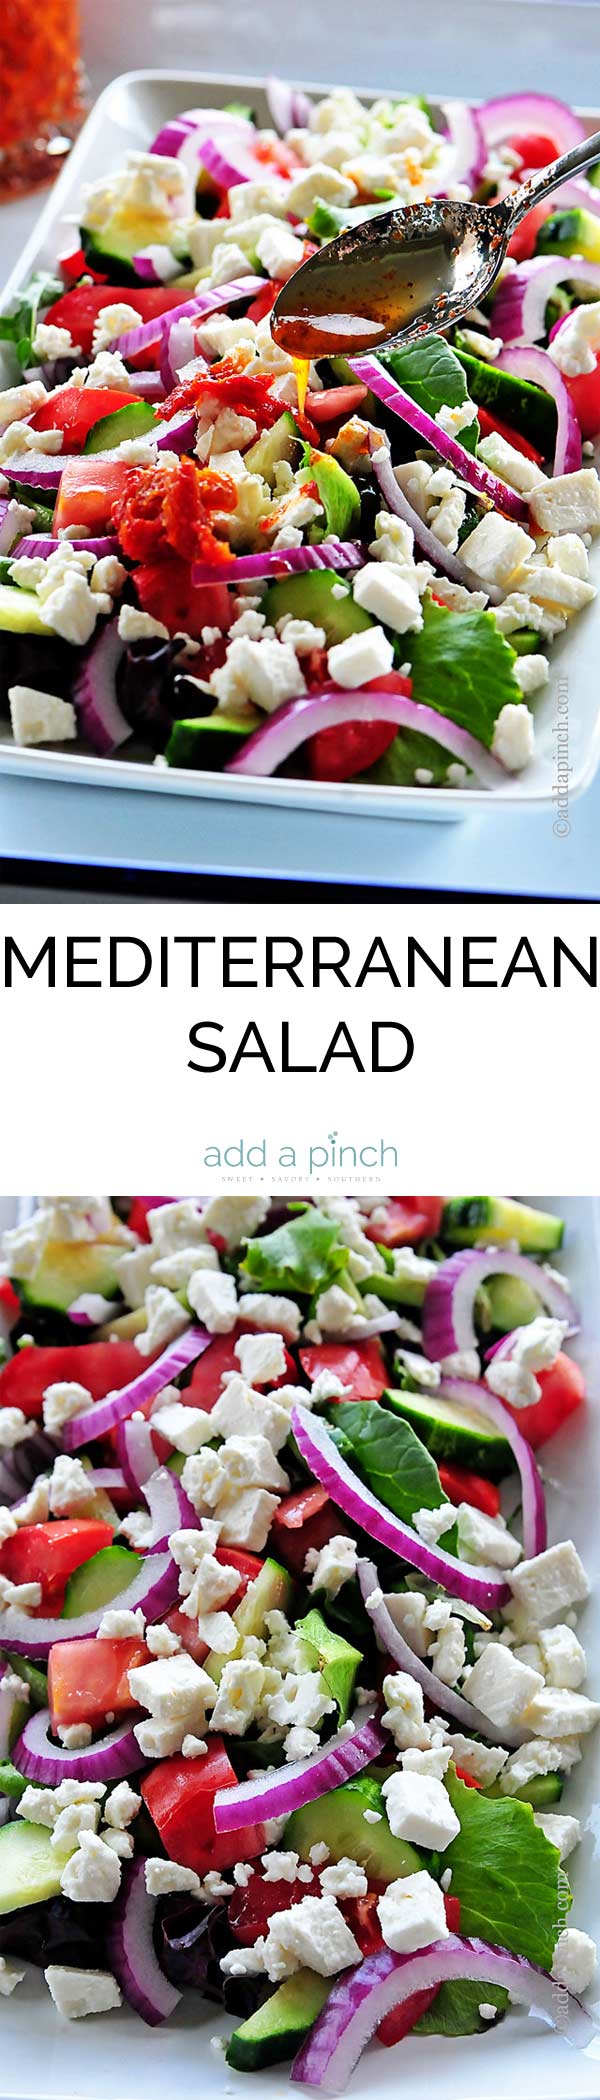 Mediterranean Salad makes a delicious recipe for a light meal or as a side dish when entertaining. Get this easy, elegant Mediterranean Salad recipe. // addapinch.com